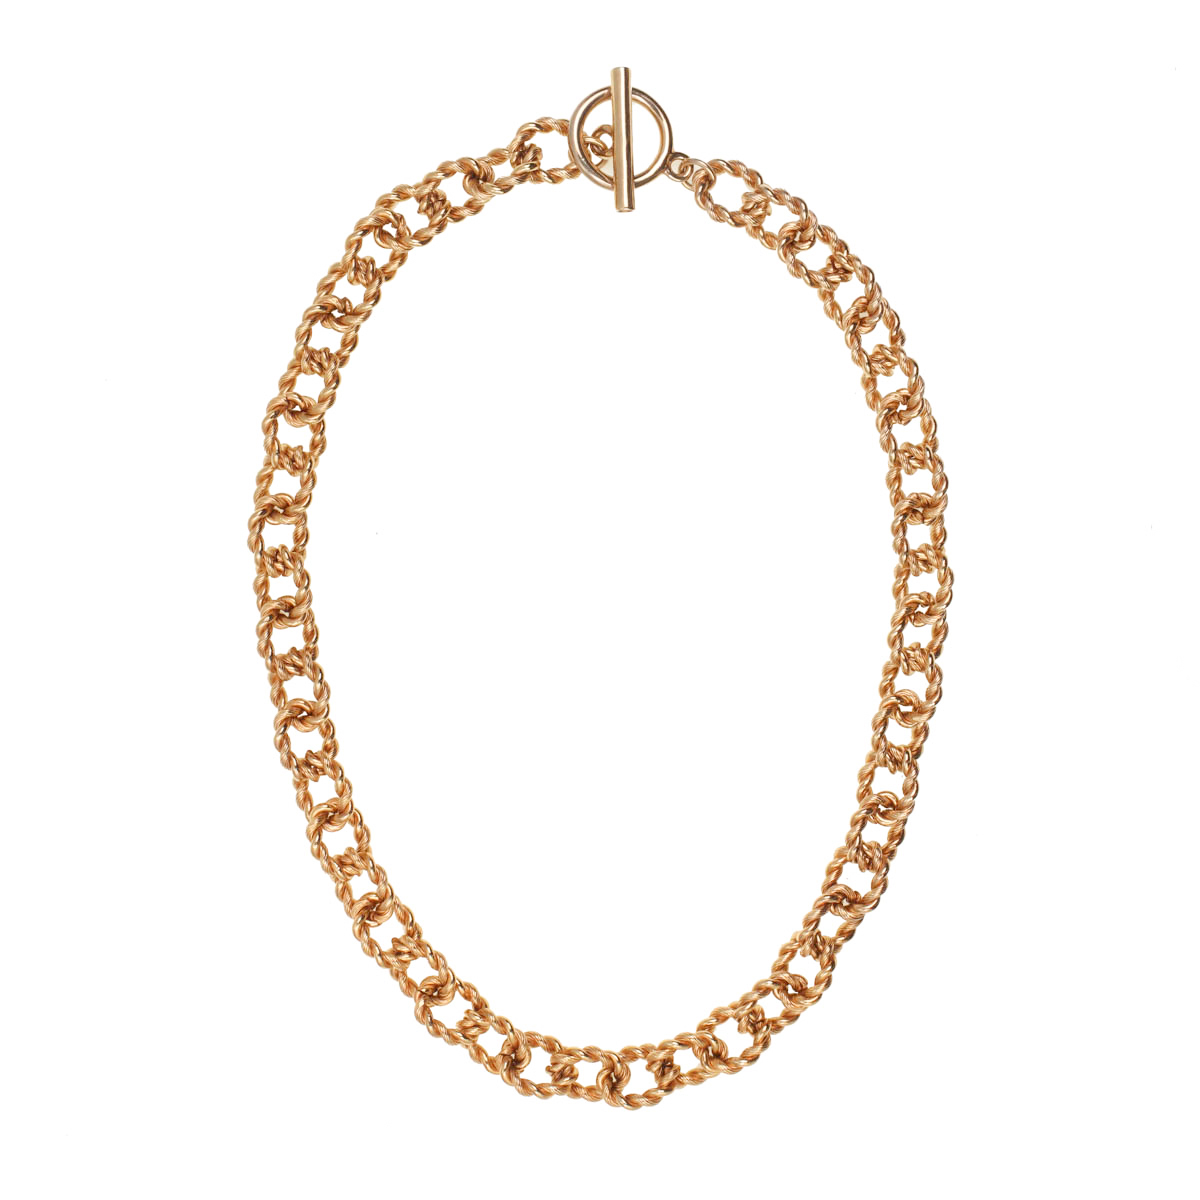 Long Gold Mixed Textured Round Chain – Carolyne Roehm